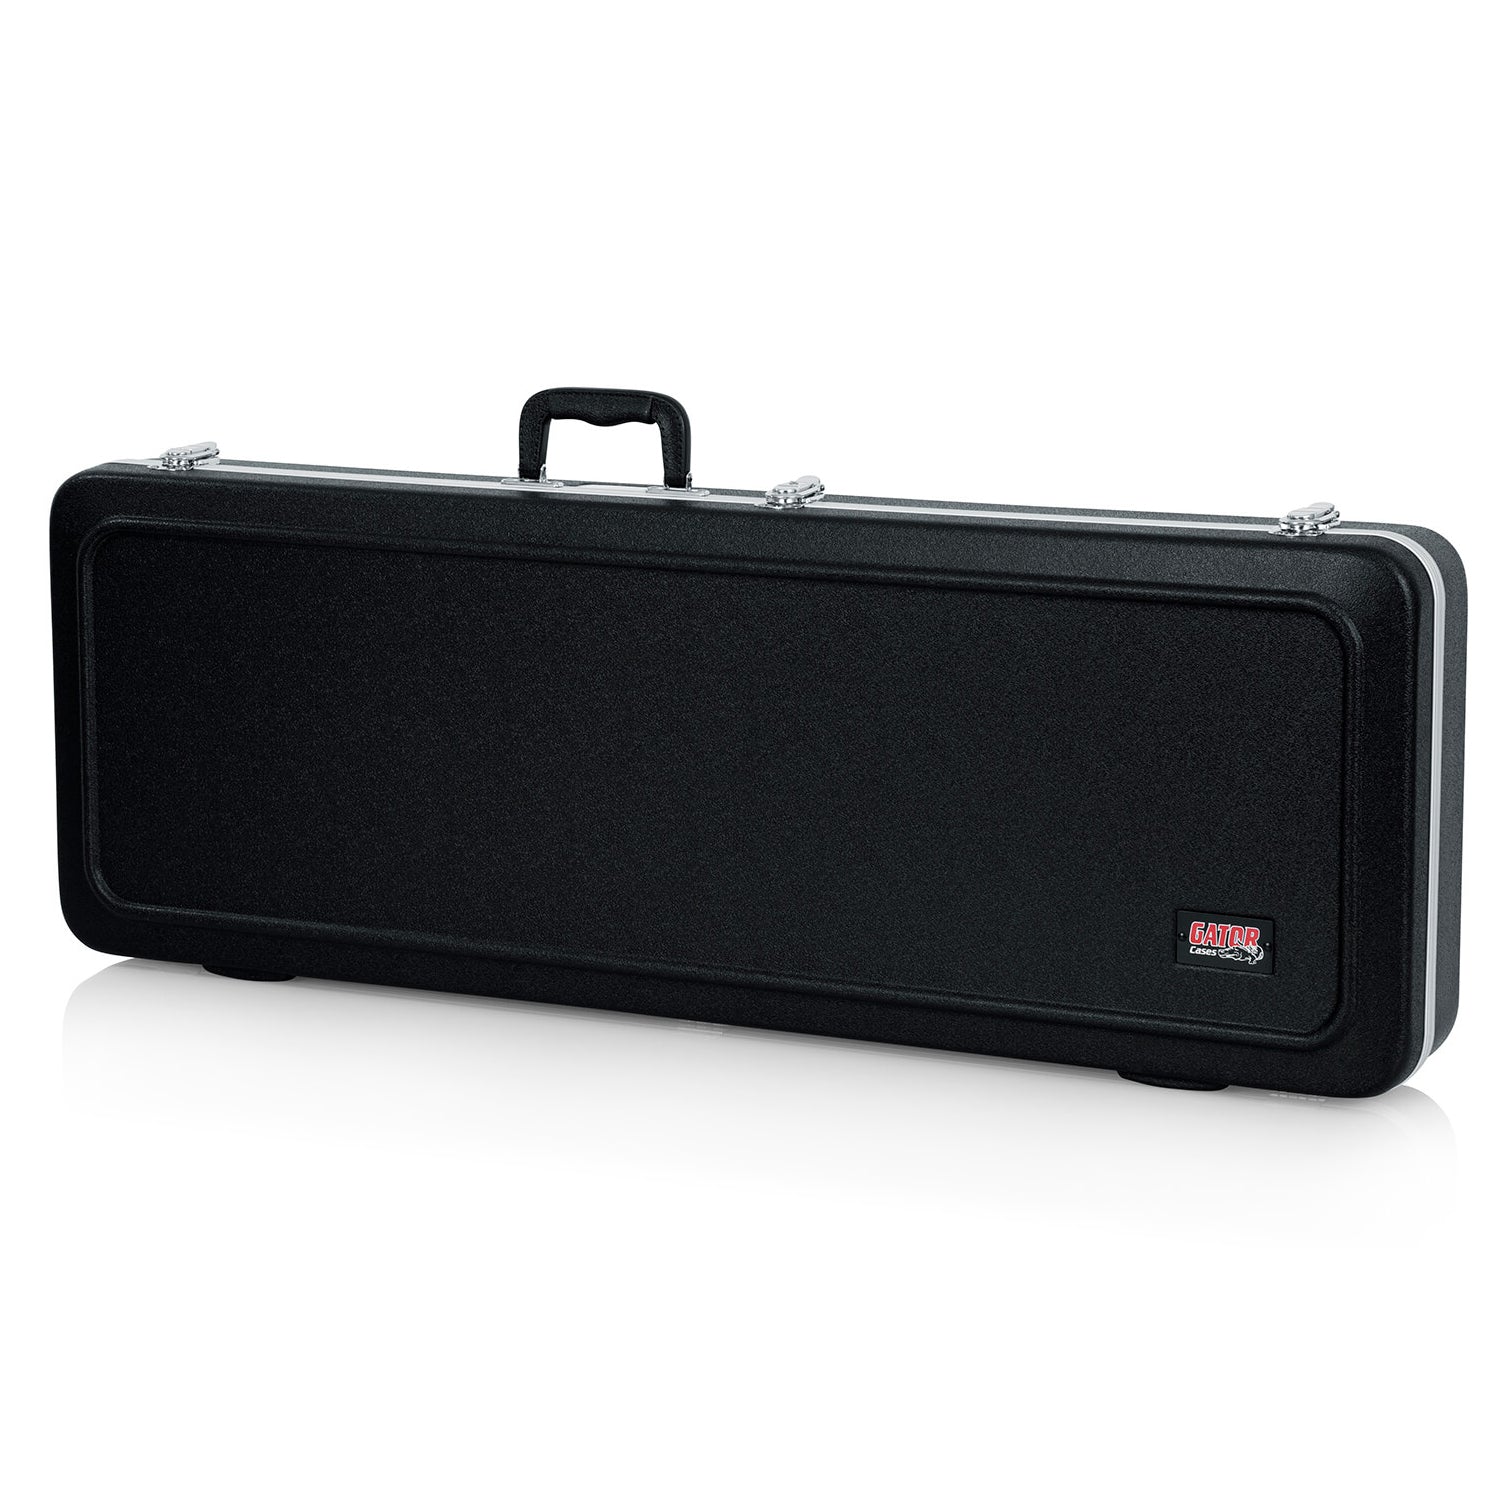 Shop online for Gator GC Electric Guitar Case today. Now available for purchase from Midlothian Music of Orland Park, Illinois, USA